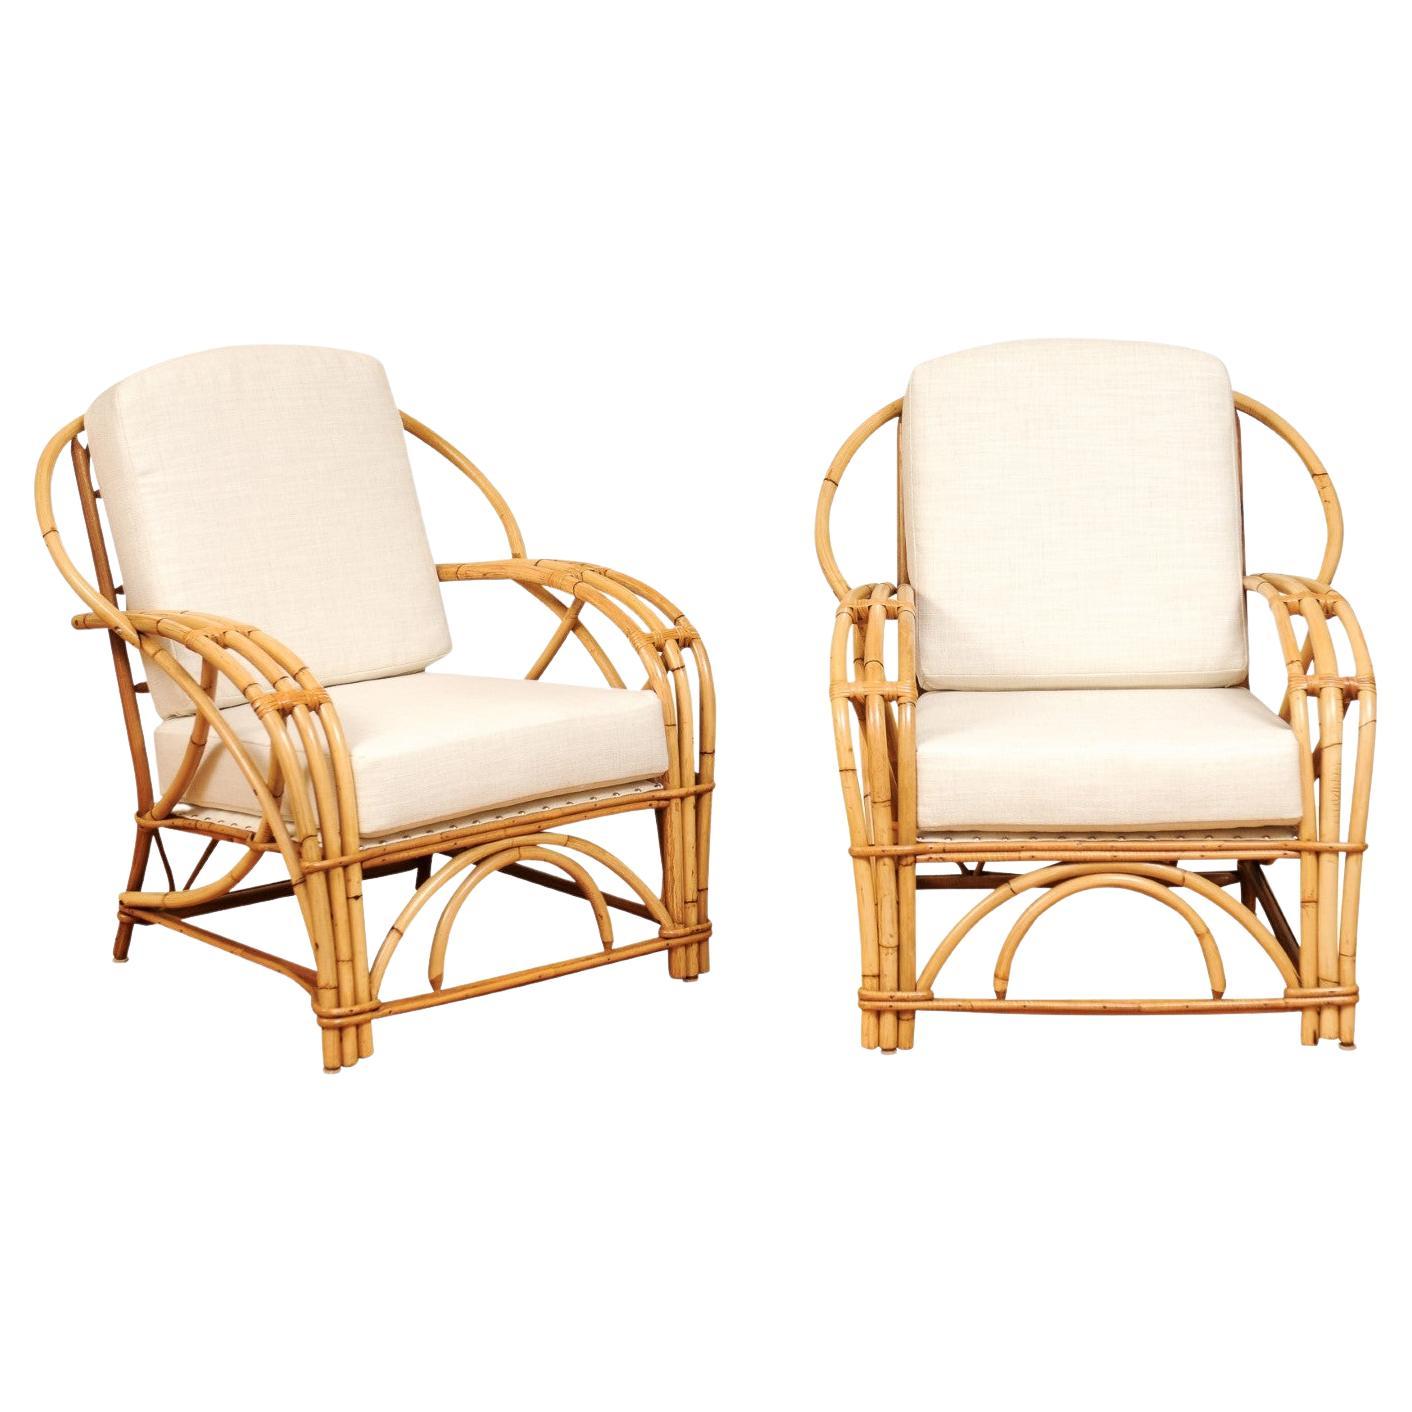 Exceptional Pair of Art Deco Rattan Loungers by Willow & Reed, circa 1945 For Sale